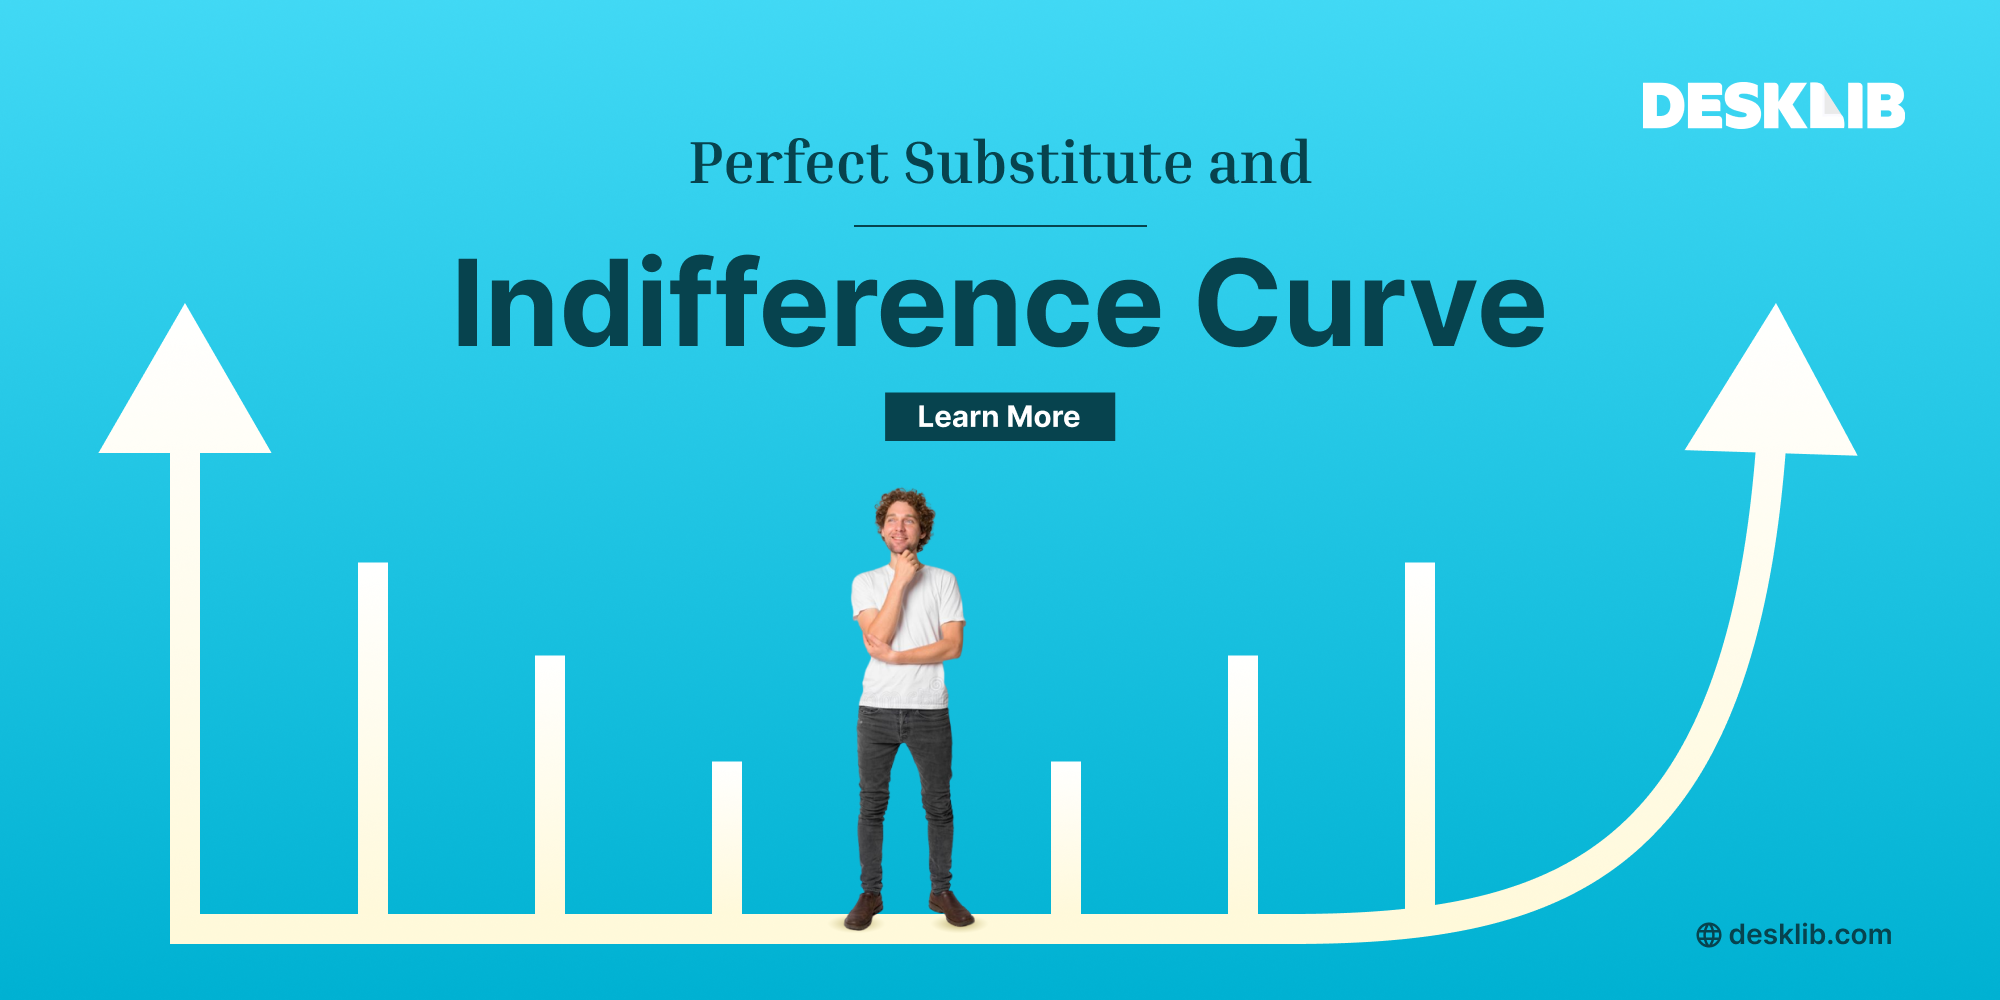 Perfect Substitute and Indifference Curve